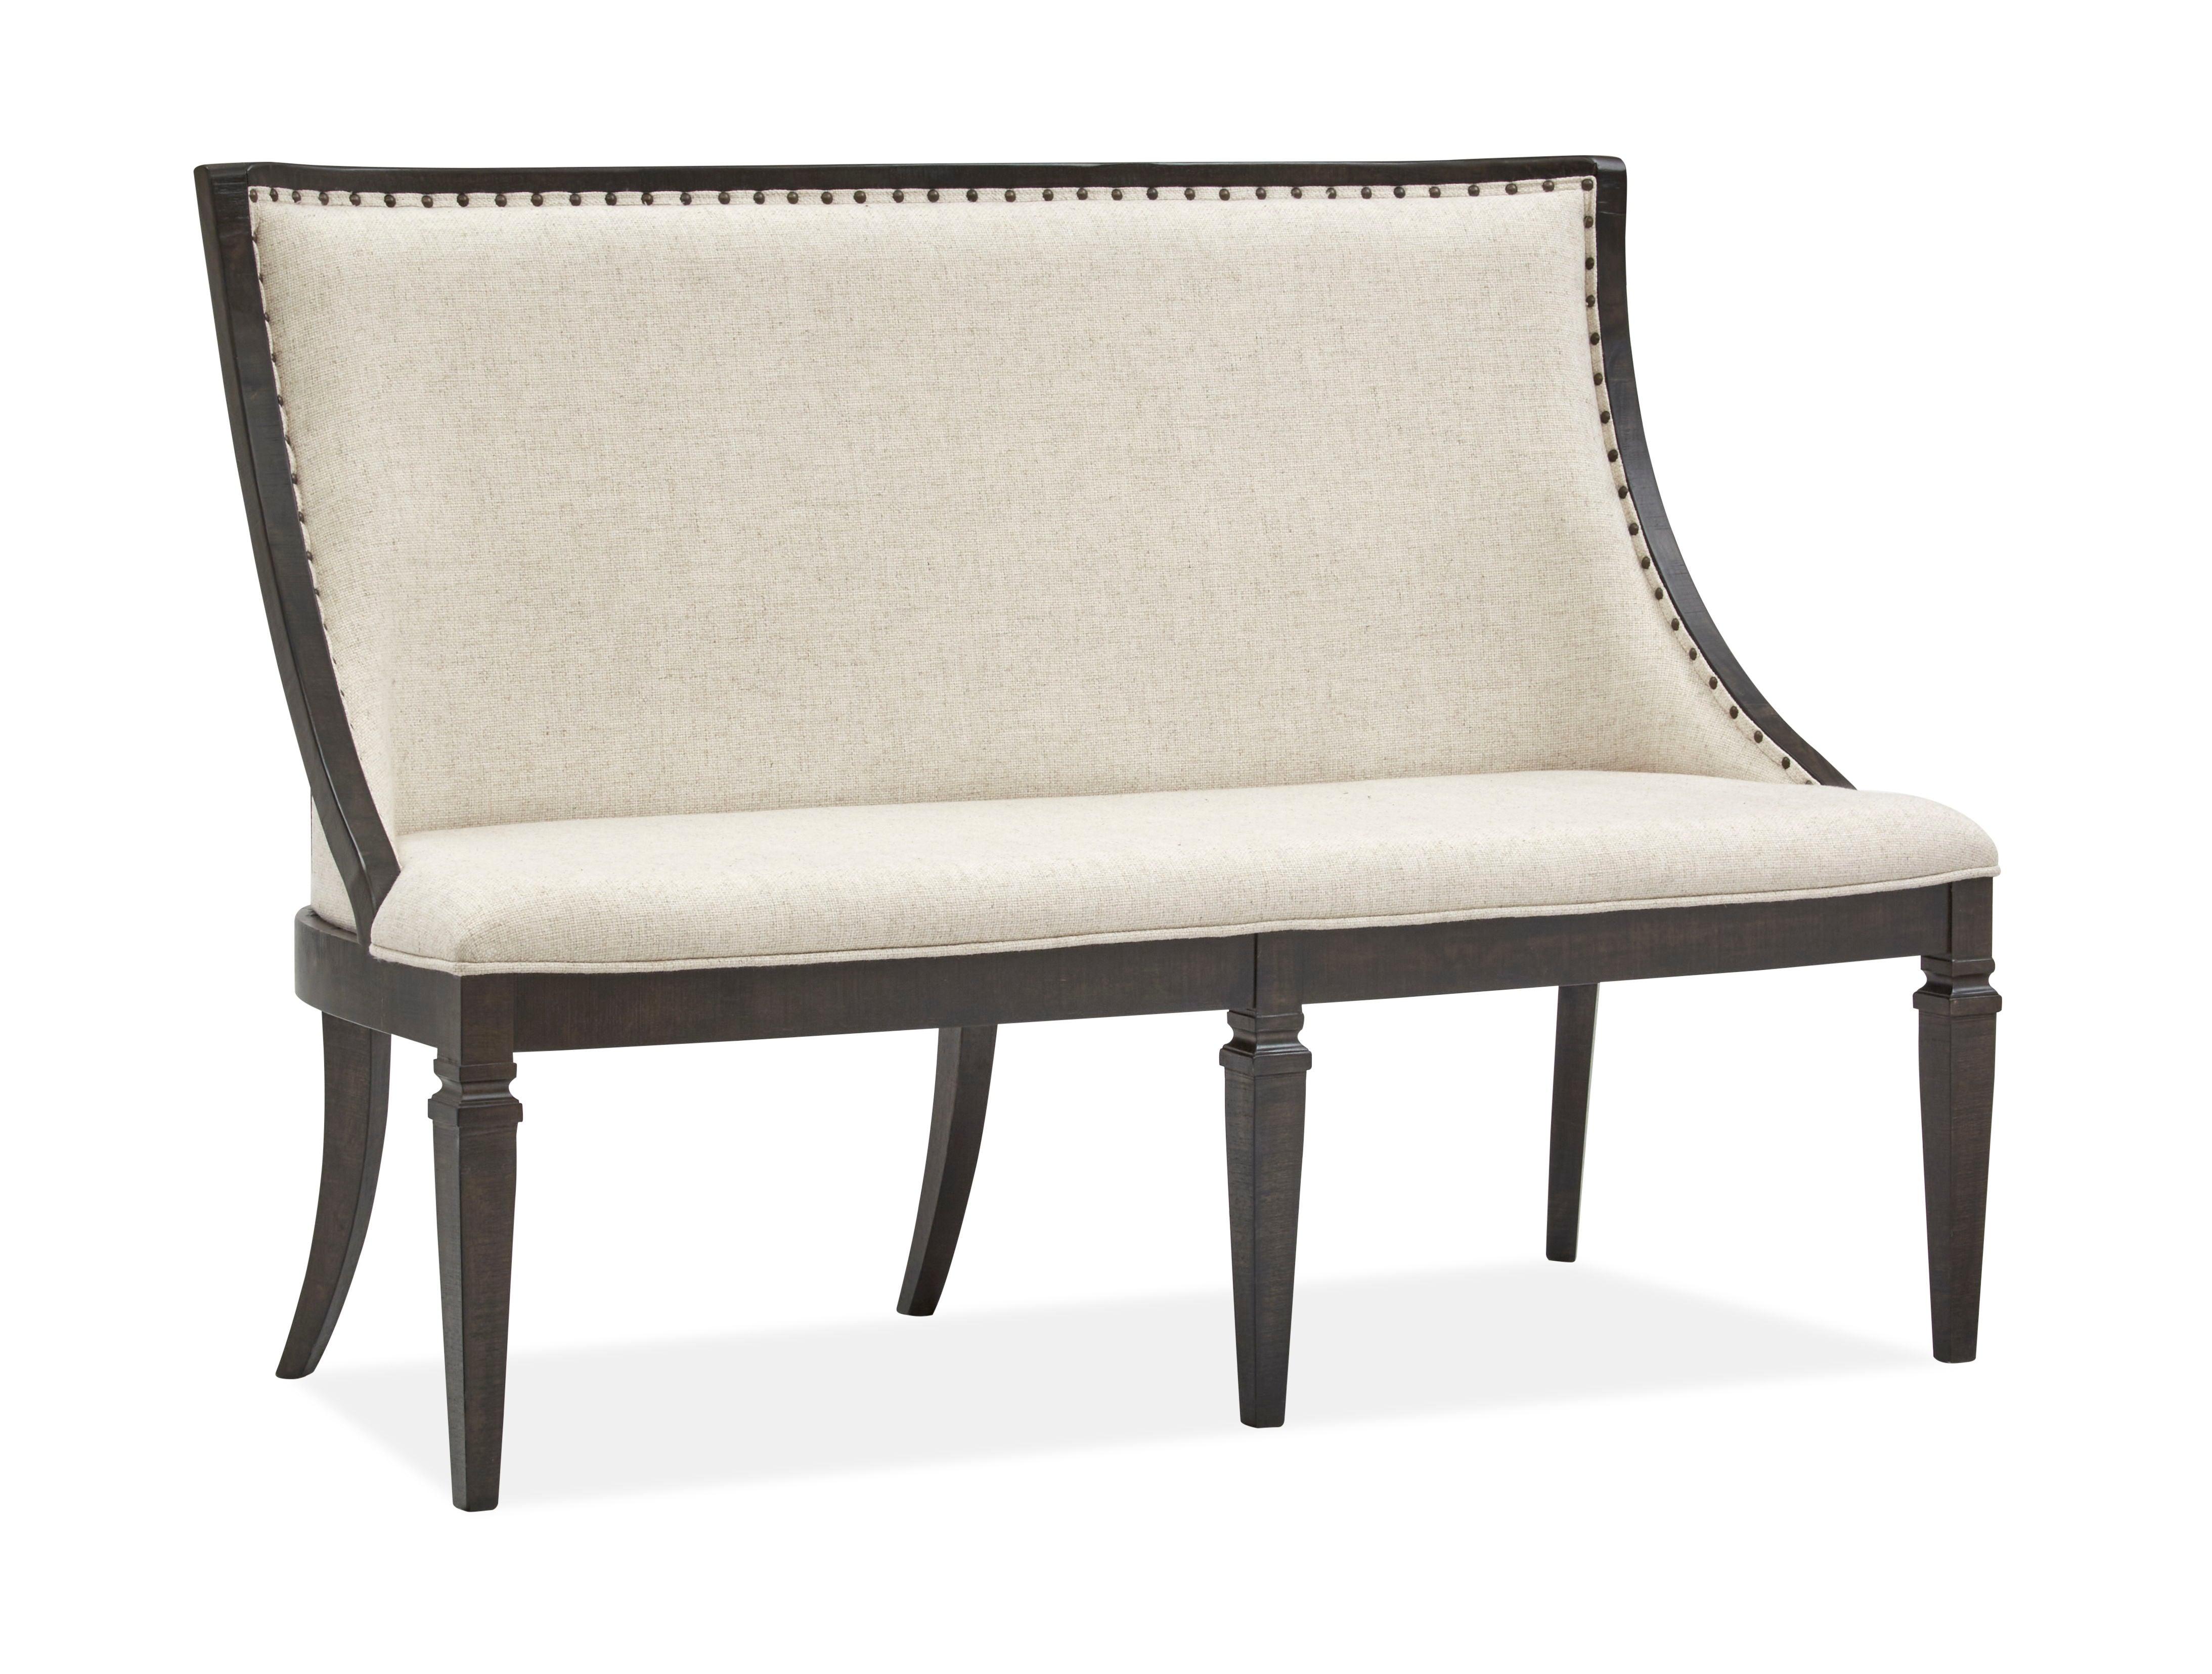 Magnussen Furniture - Calistoga - Bench With Upholstered Seat & Back - Weathered Charcoal - 5th Avenue Furniture